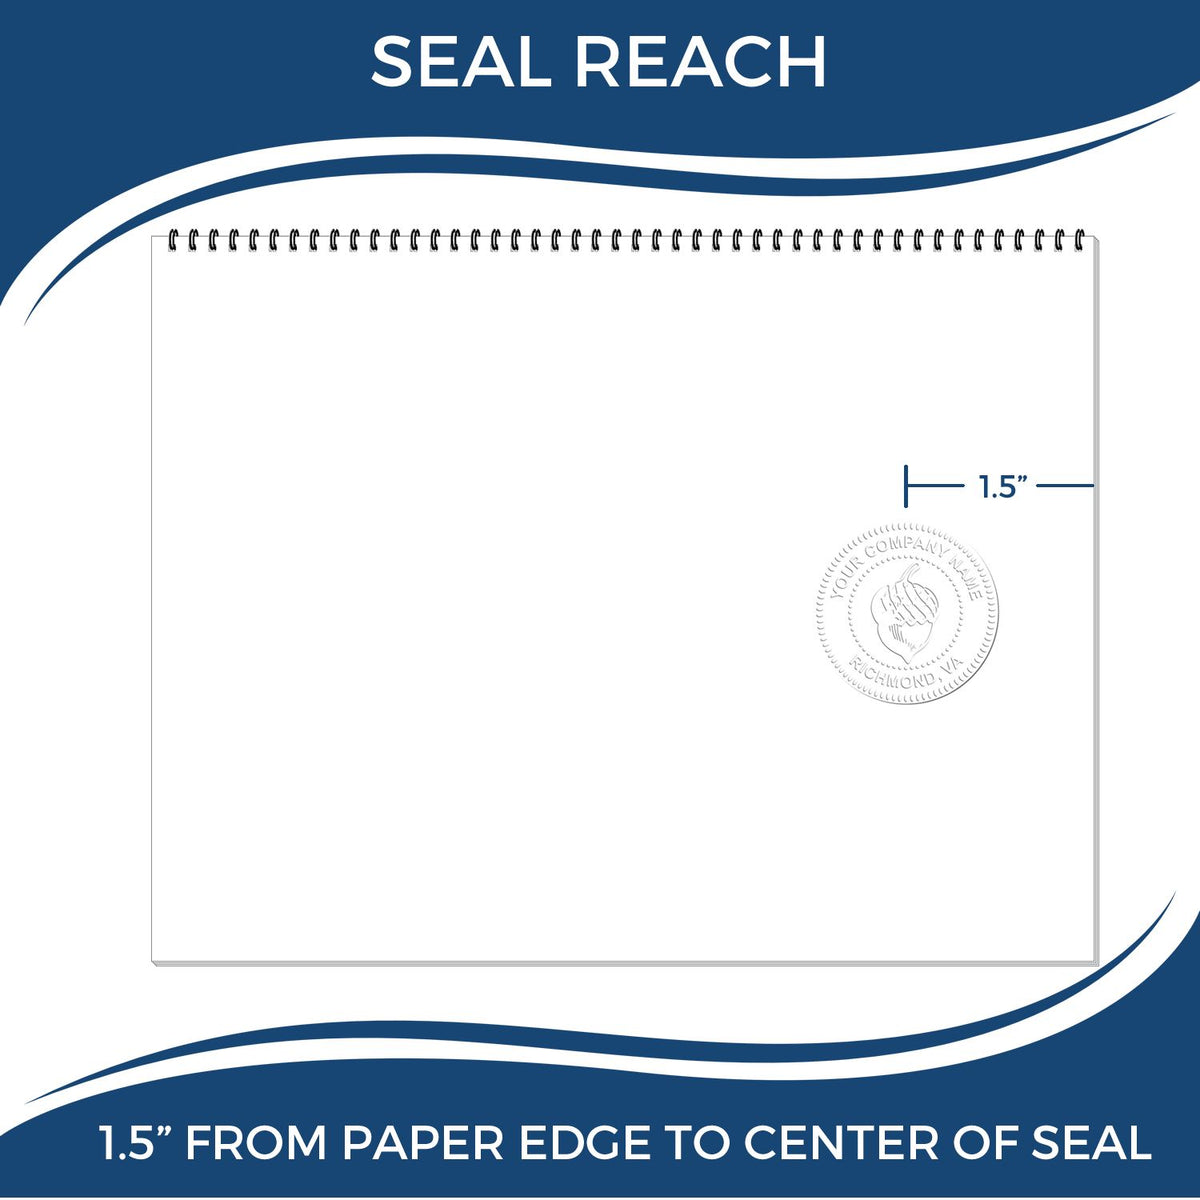 An infographic showing the seal reach which is represented by a ruler and a miniature seal image of the Gift Arkansas Geologist Seal